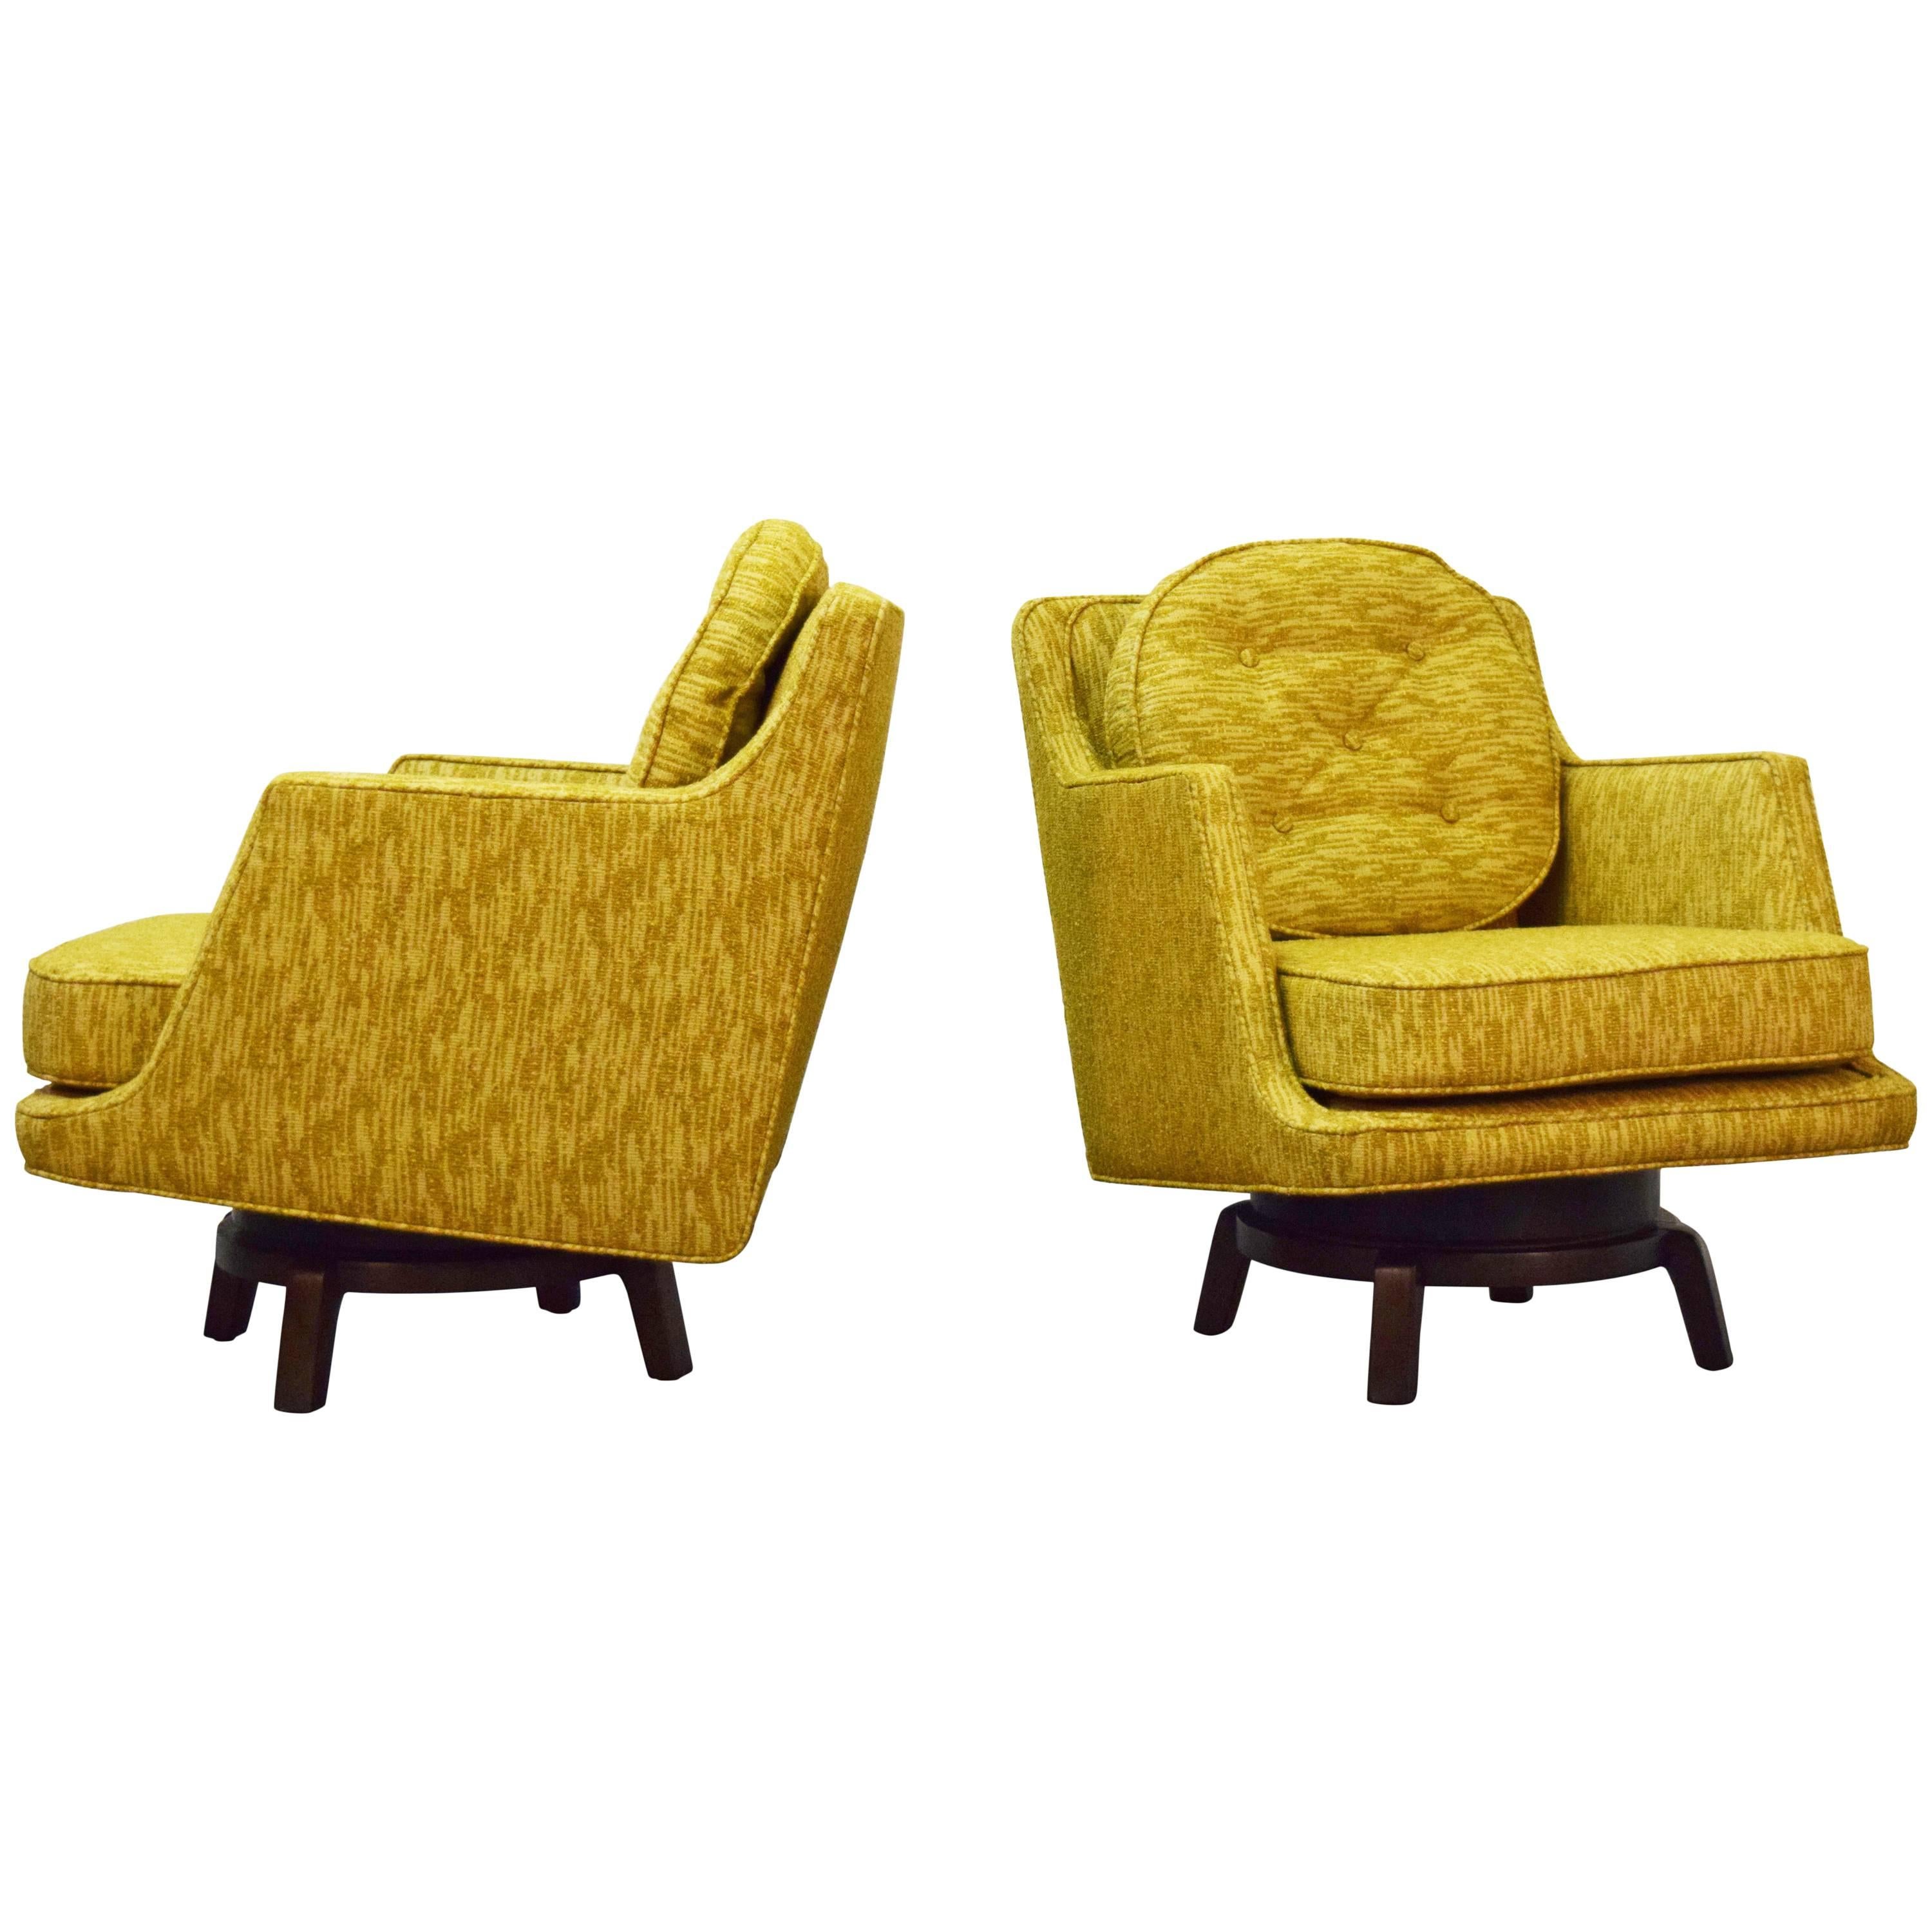 Pair of Edward Wormley Swivel Lounge Chairs for Dunbar